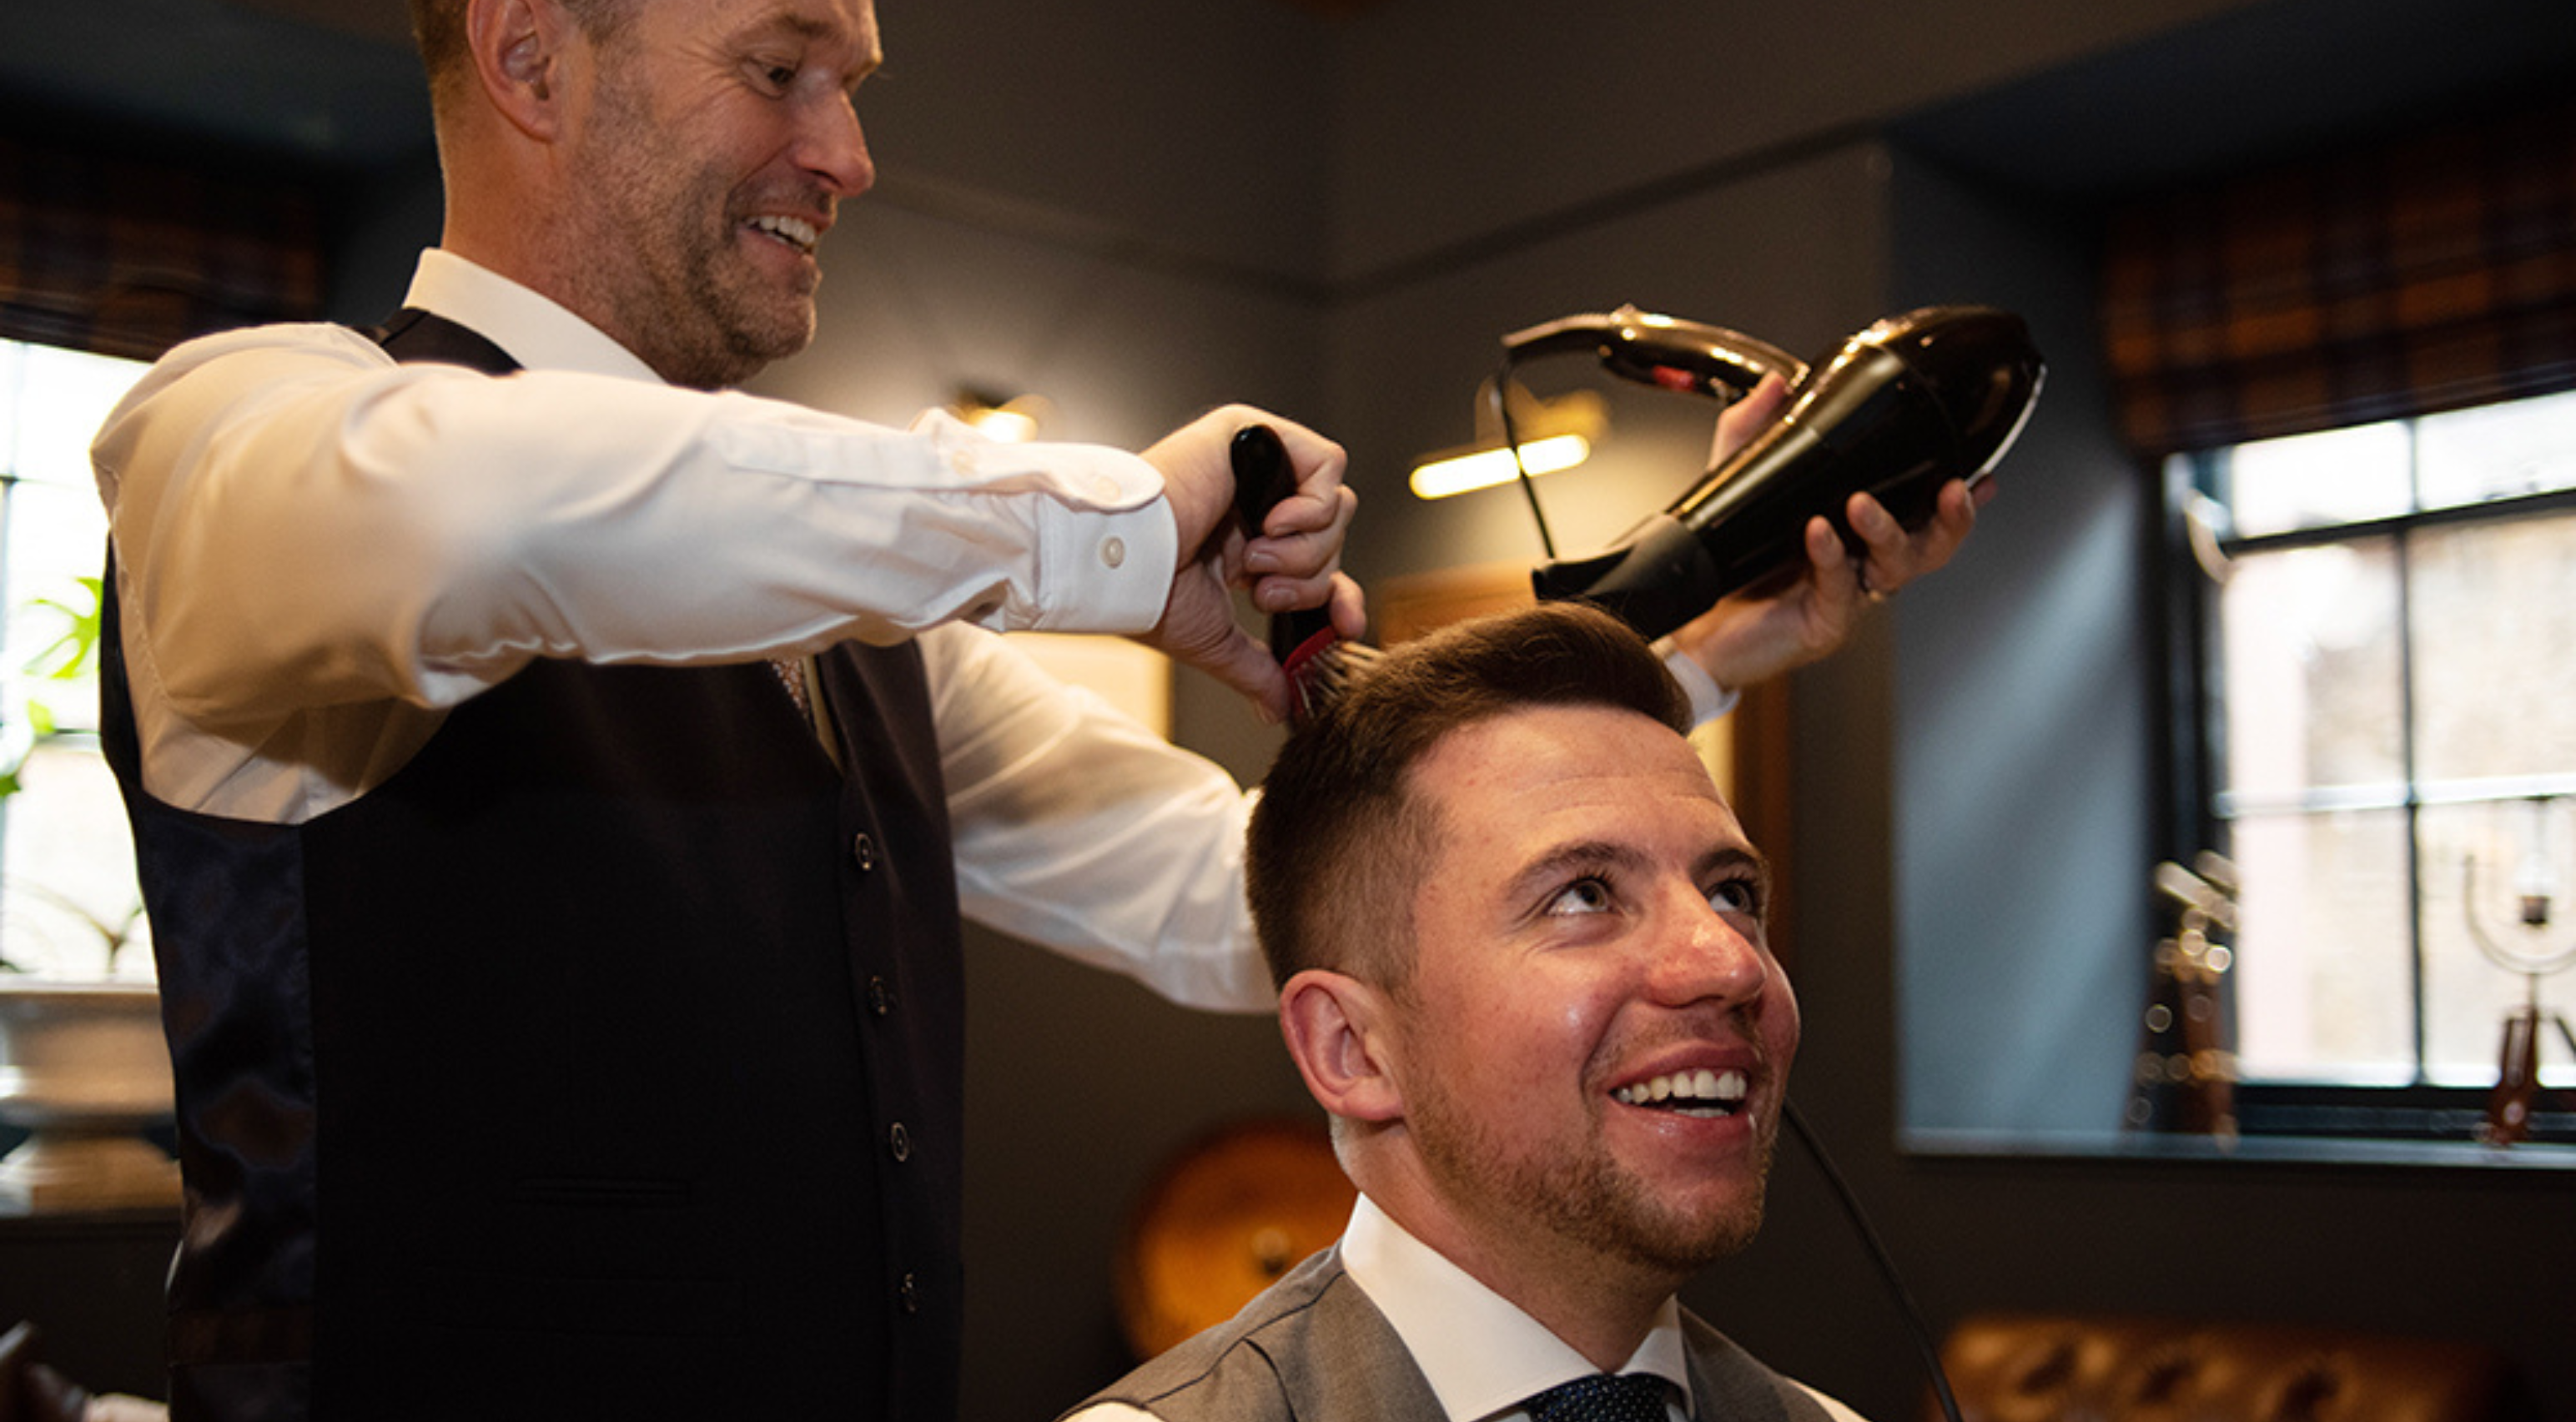 Groom smiling while getting hair done